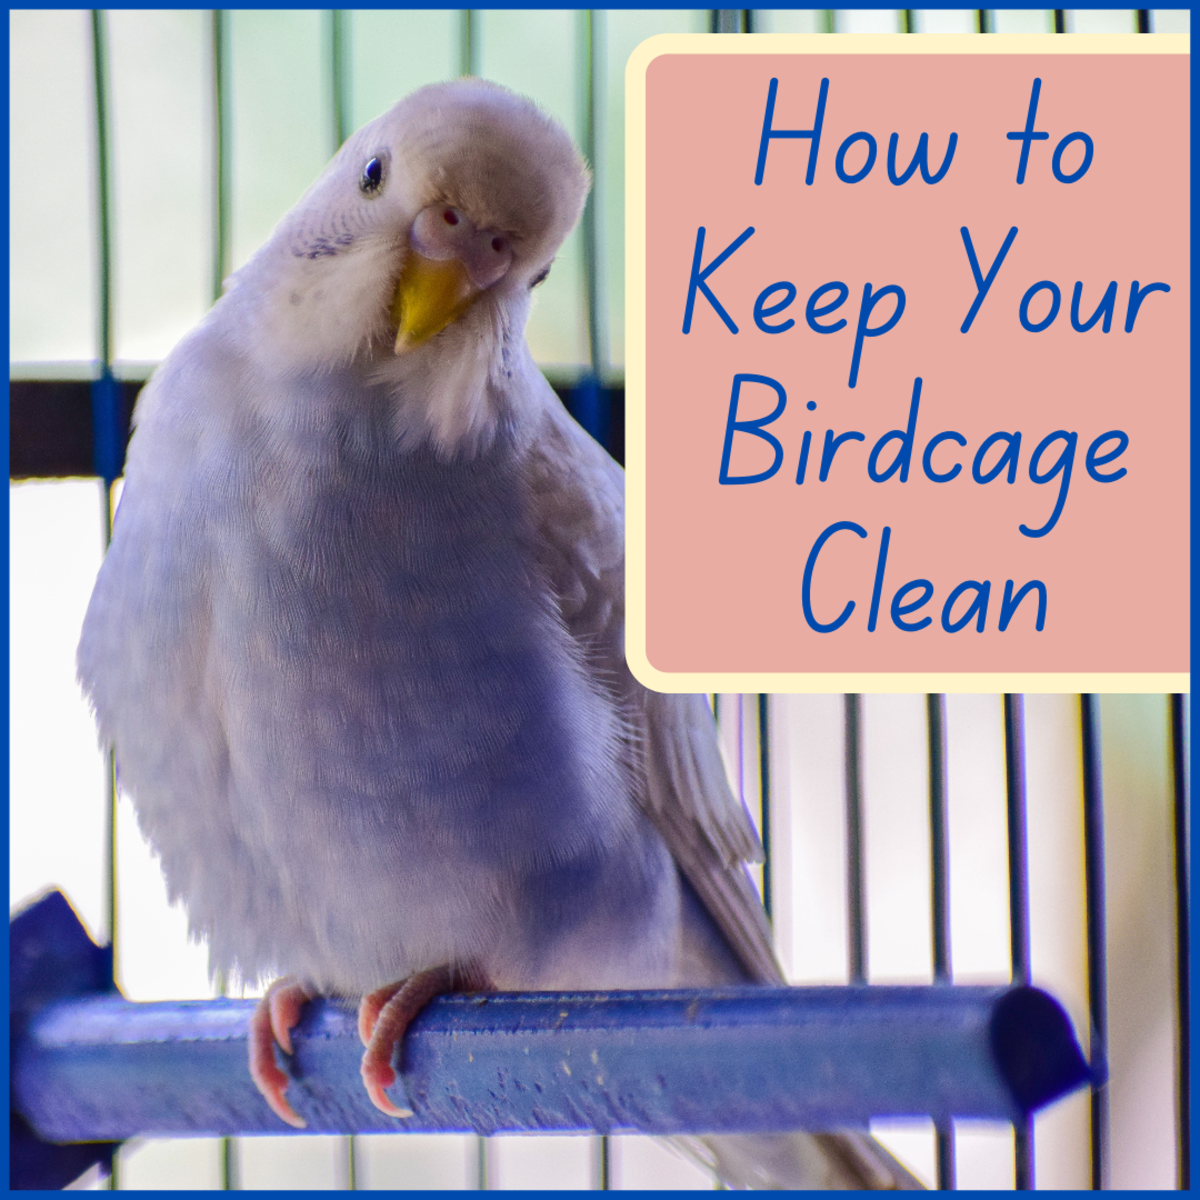 Learn a few easy ways to trick out your birdcage and save yourself the mess.  